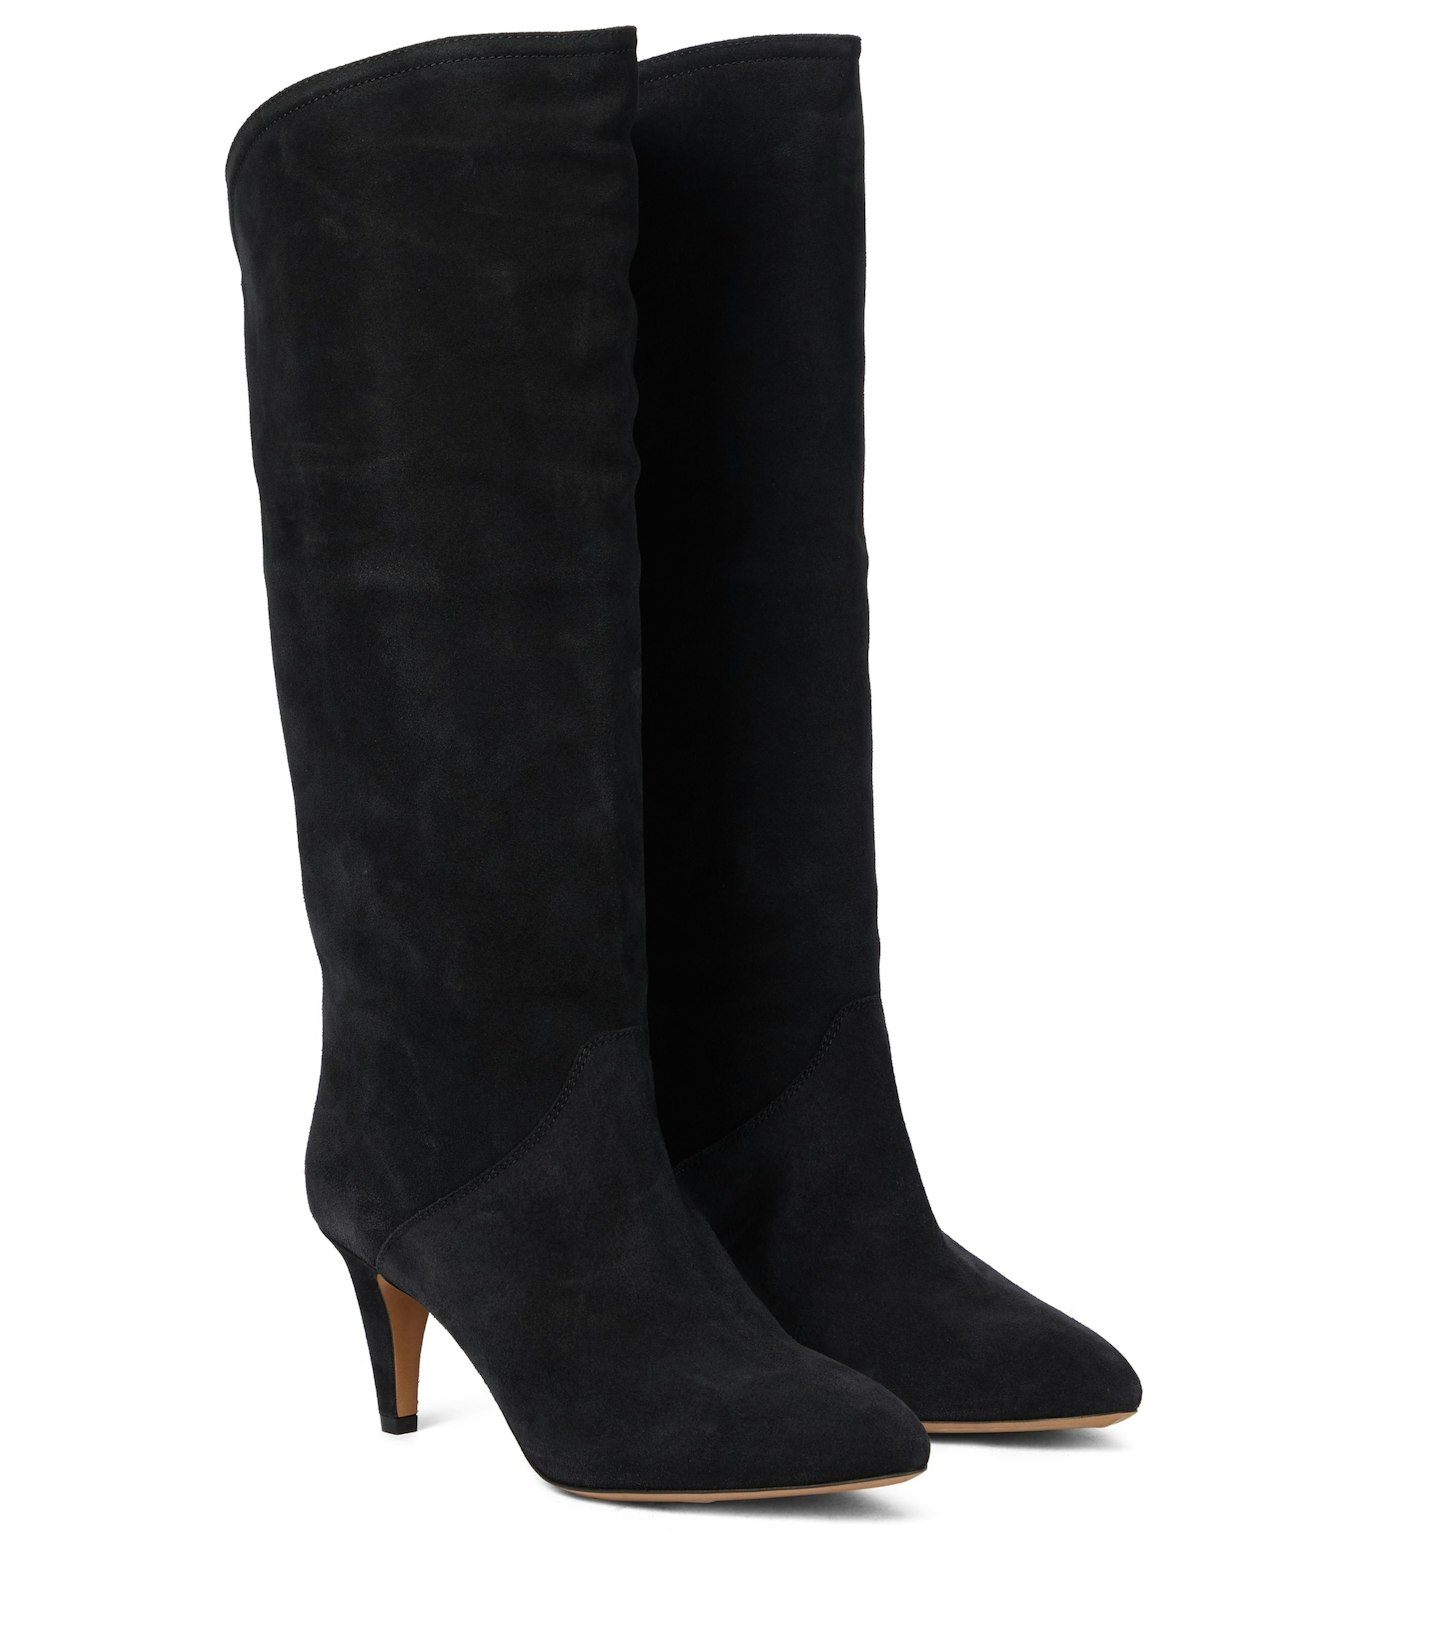 Isabel Marant Slouch Suede Boots, £815